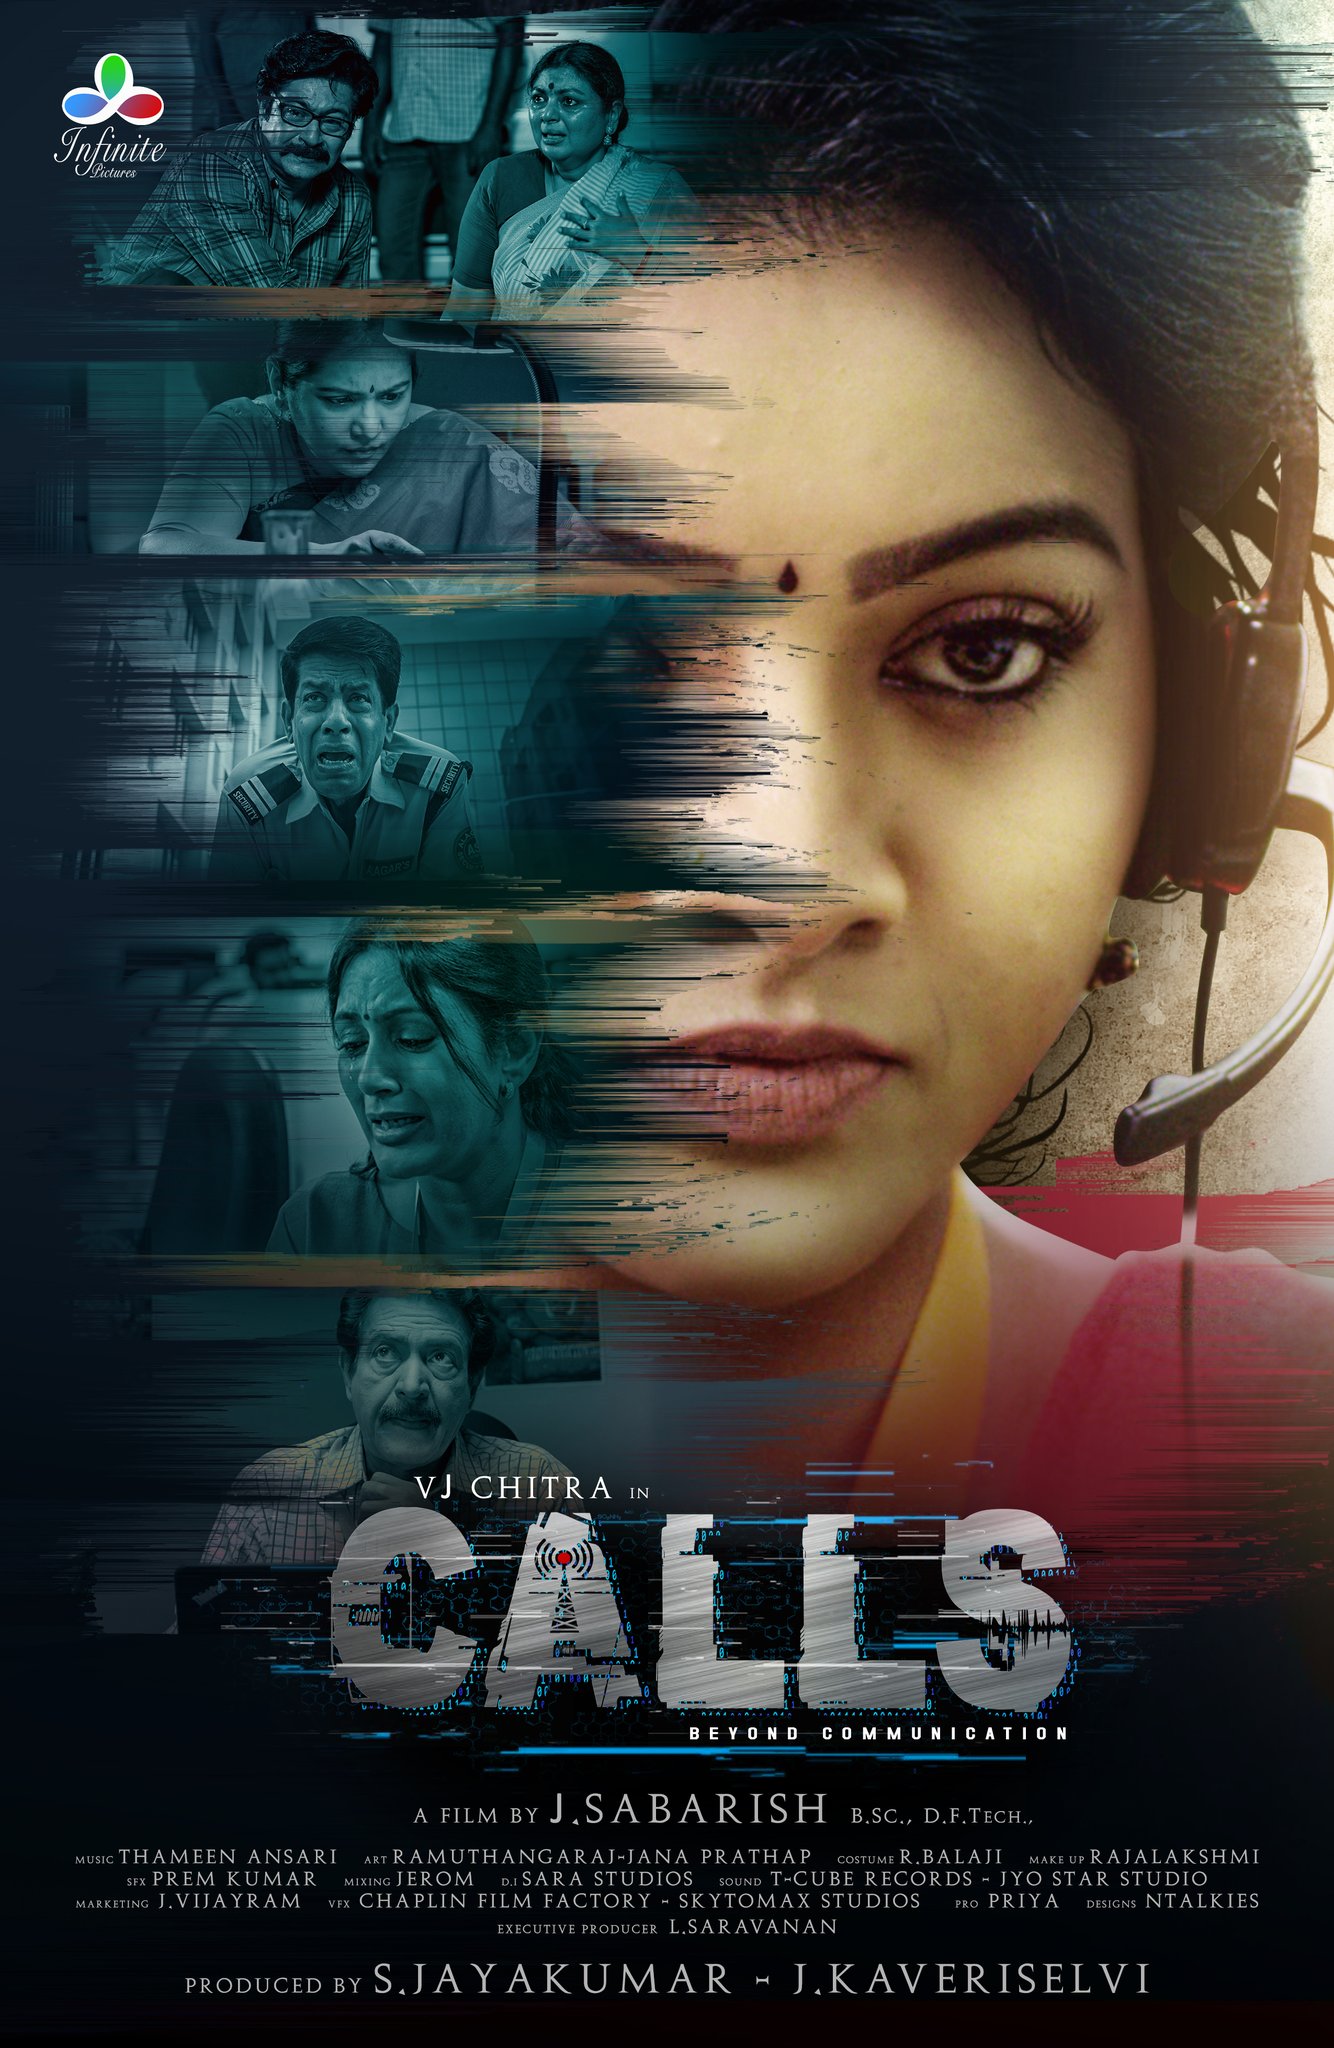 VJ Chitra’s first and last film Calls second look and teaser out, directed by Sabarish J